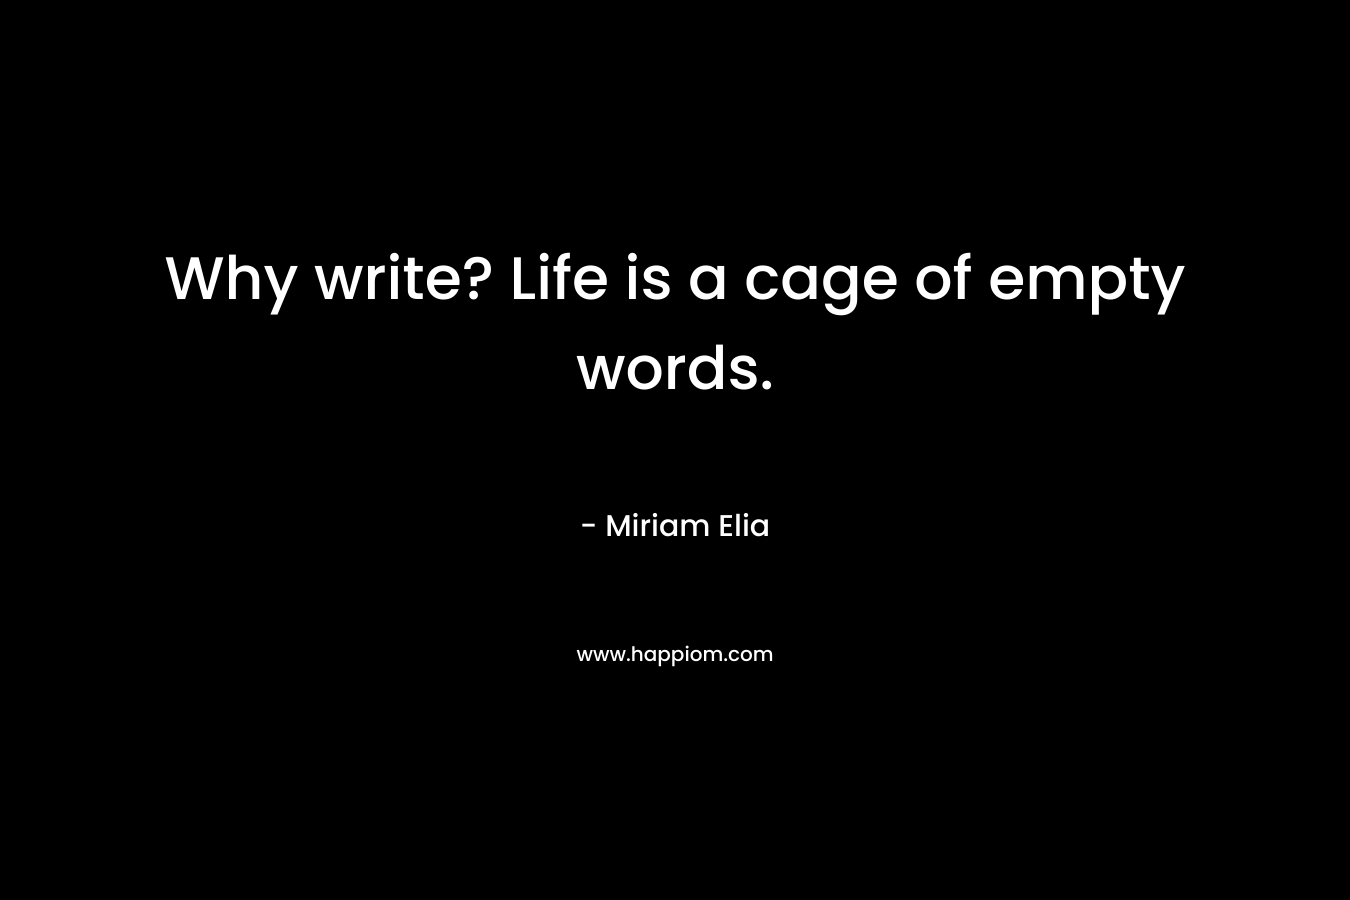 Why write? Life is a cage of empty words.